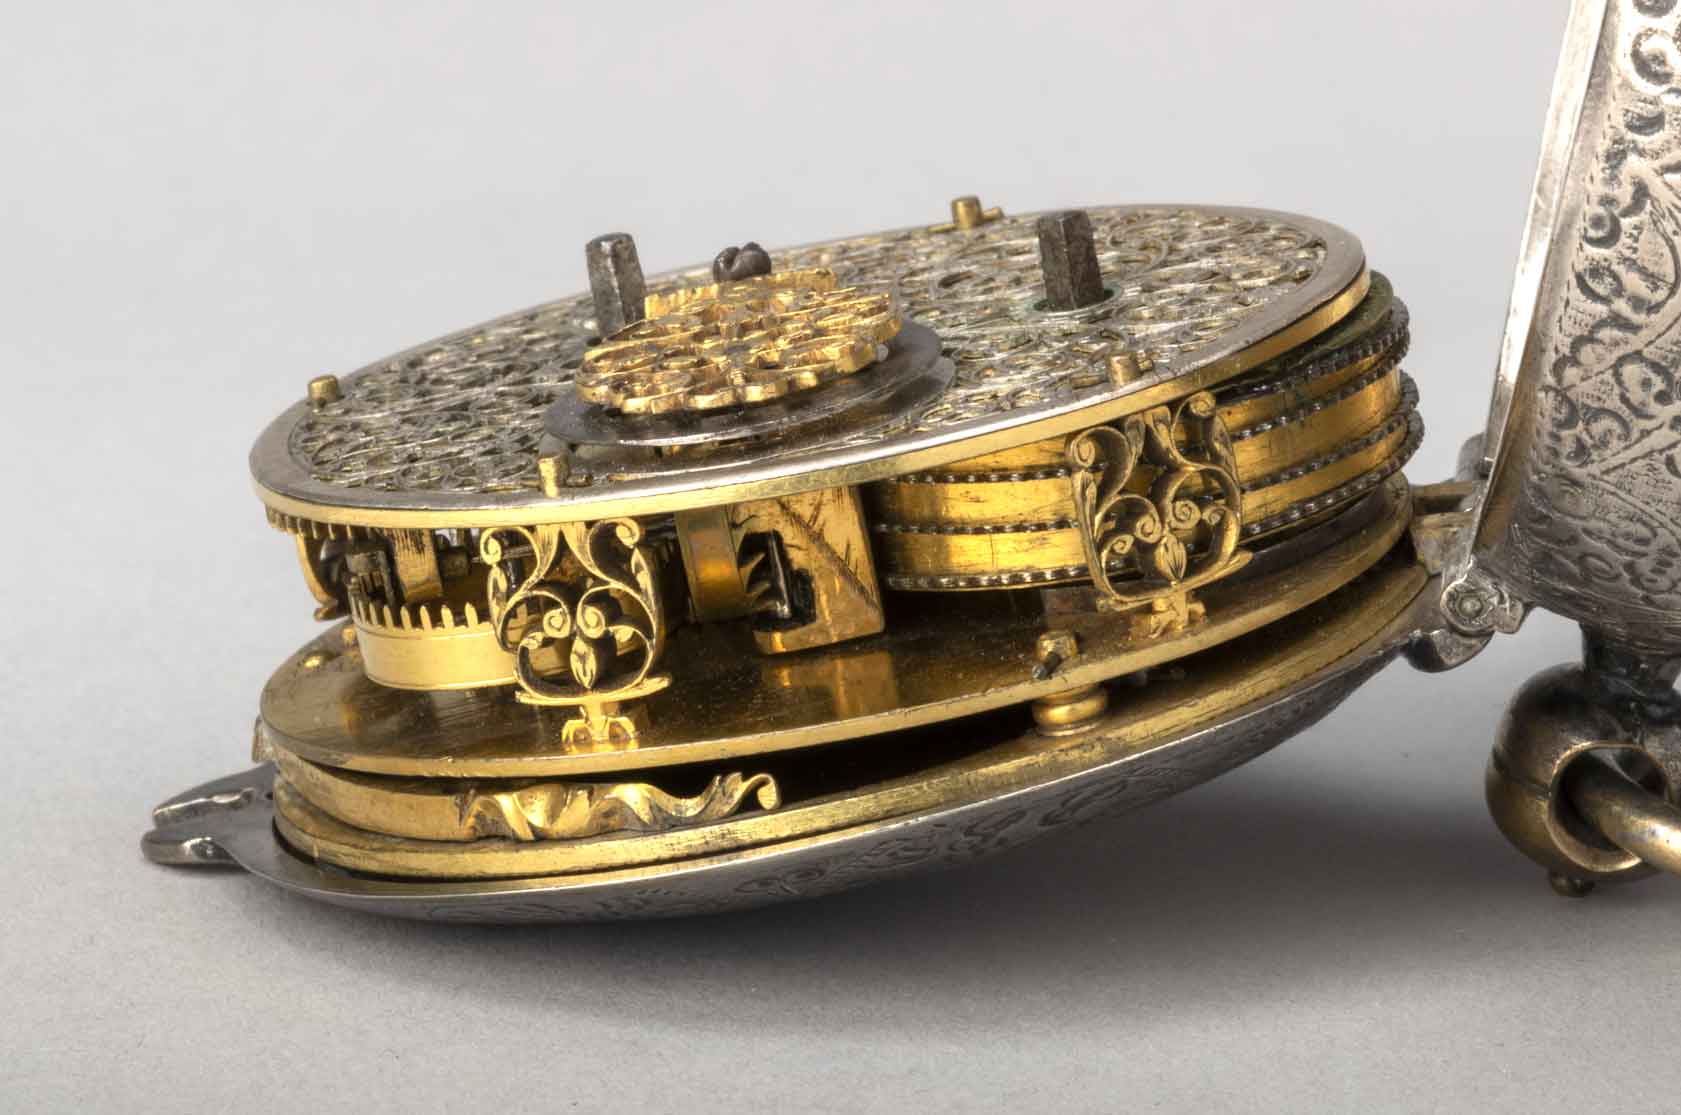 Astronomical Watch with a Calendar (detail), about 1650–75, probably Geneva, Switzerland, silver and gilded brass. Taft Museum of Art, 1932.52